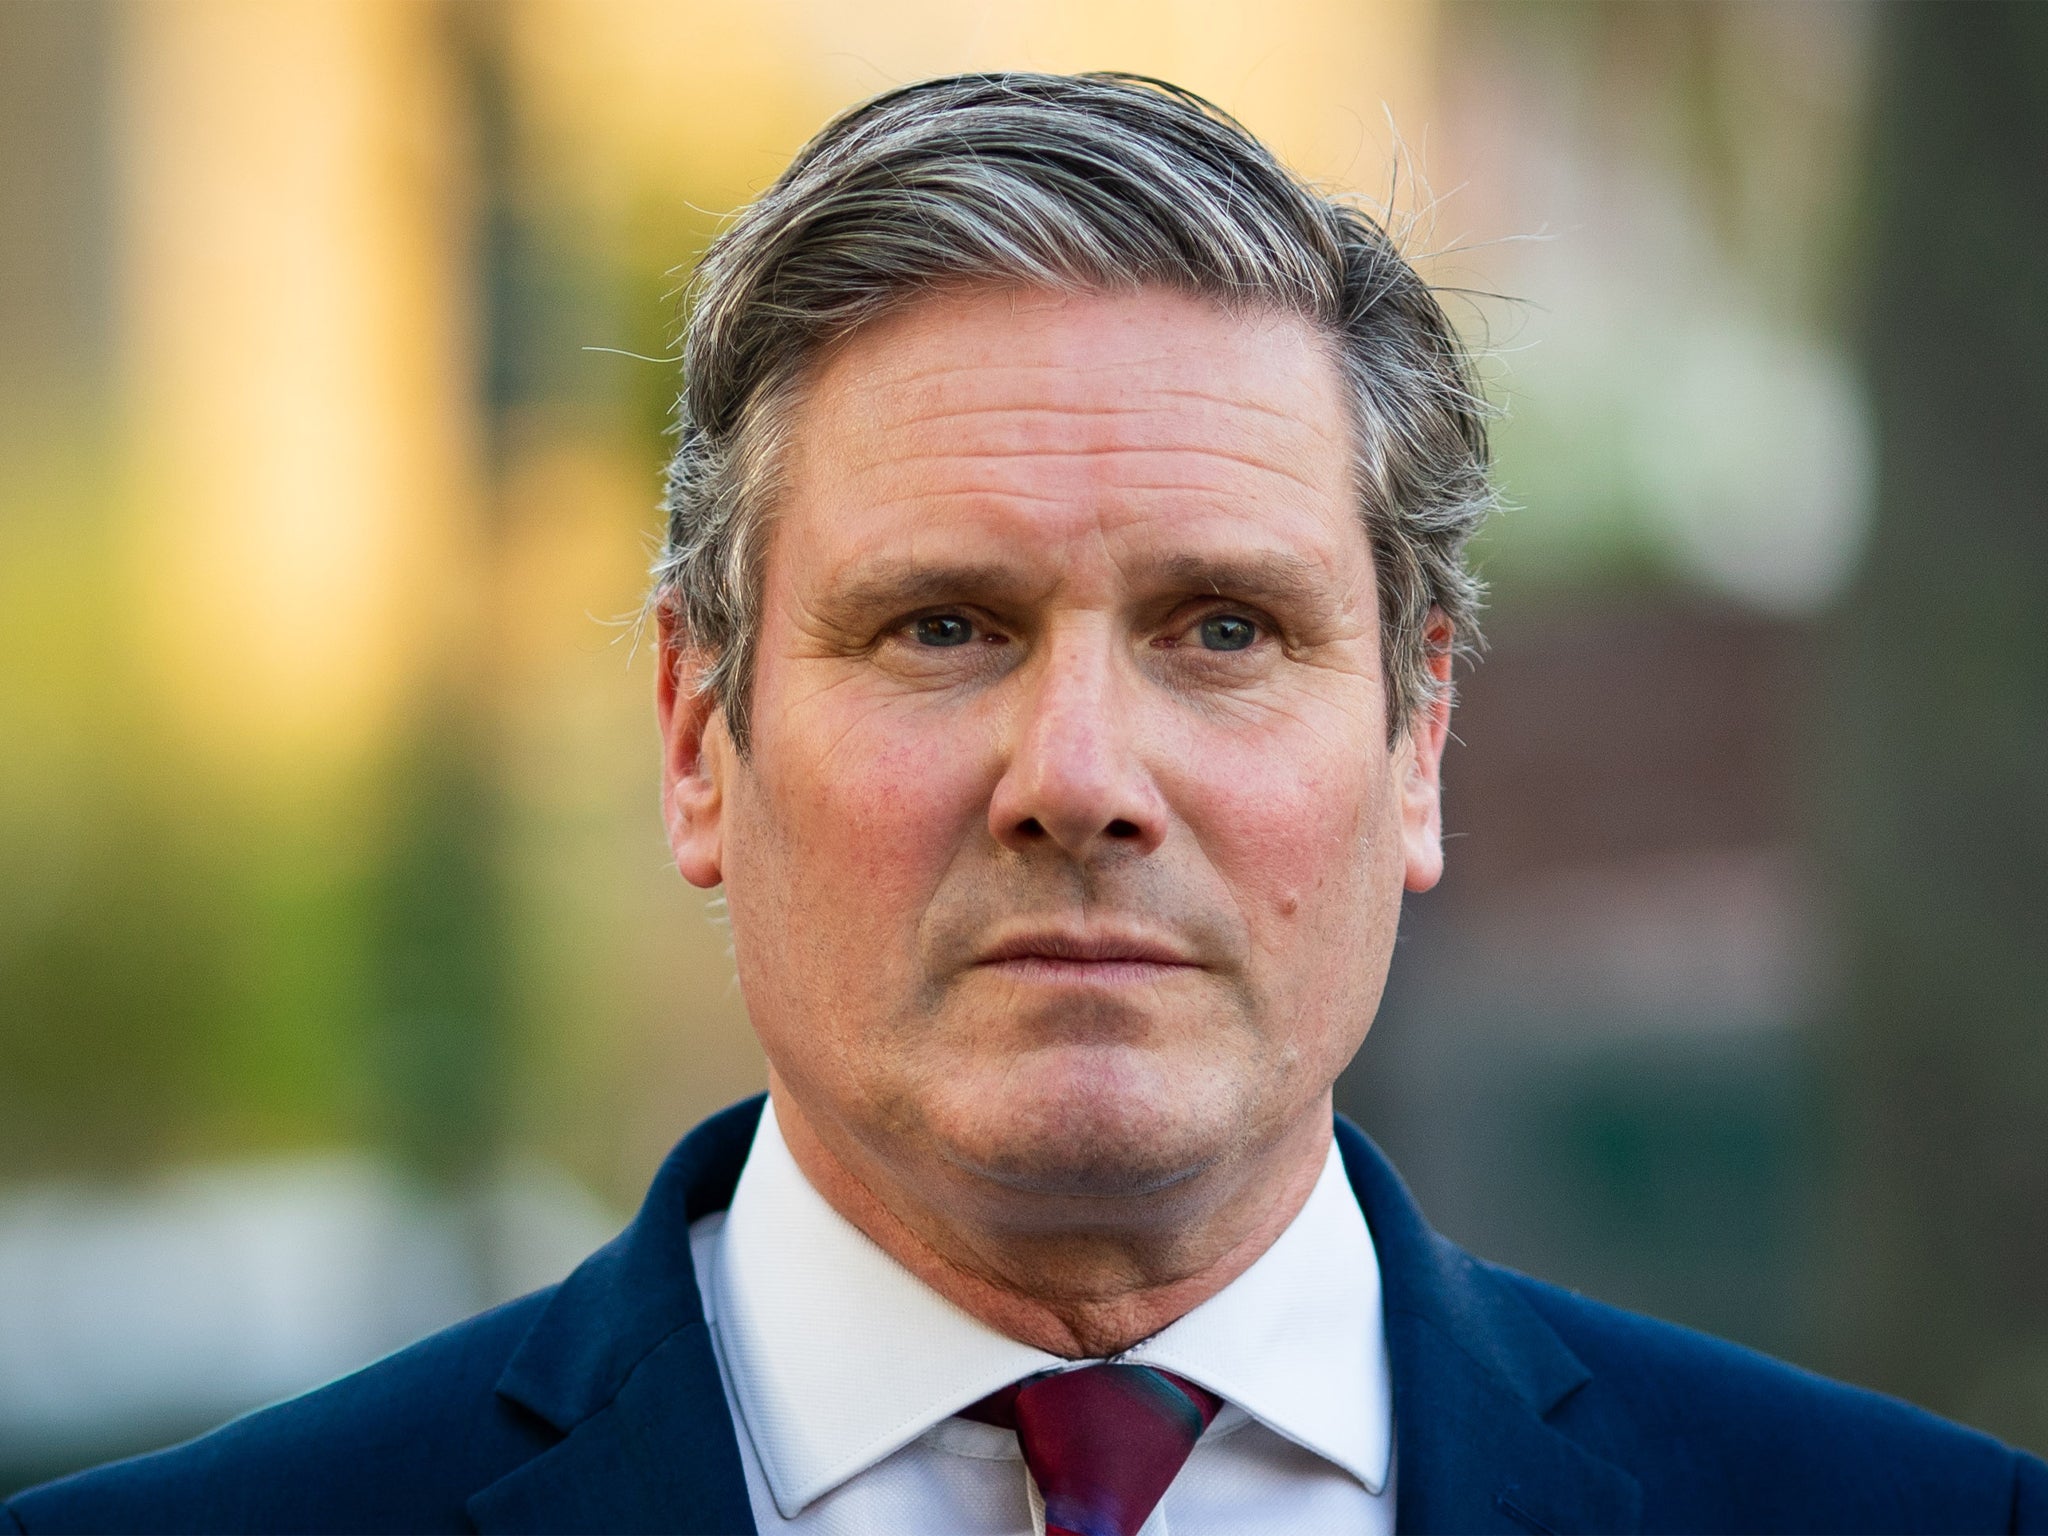 Starmer is coming under some renewed attacks from the left